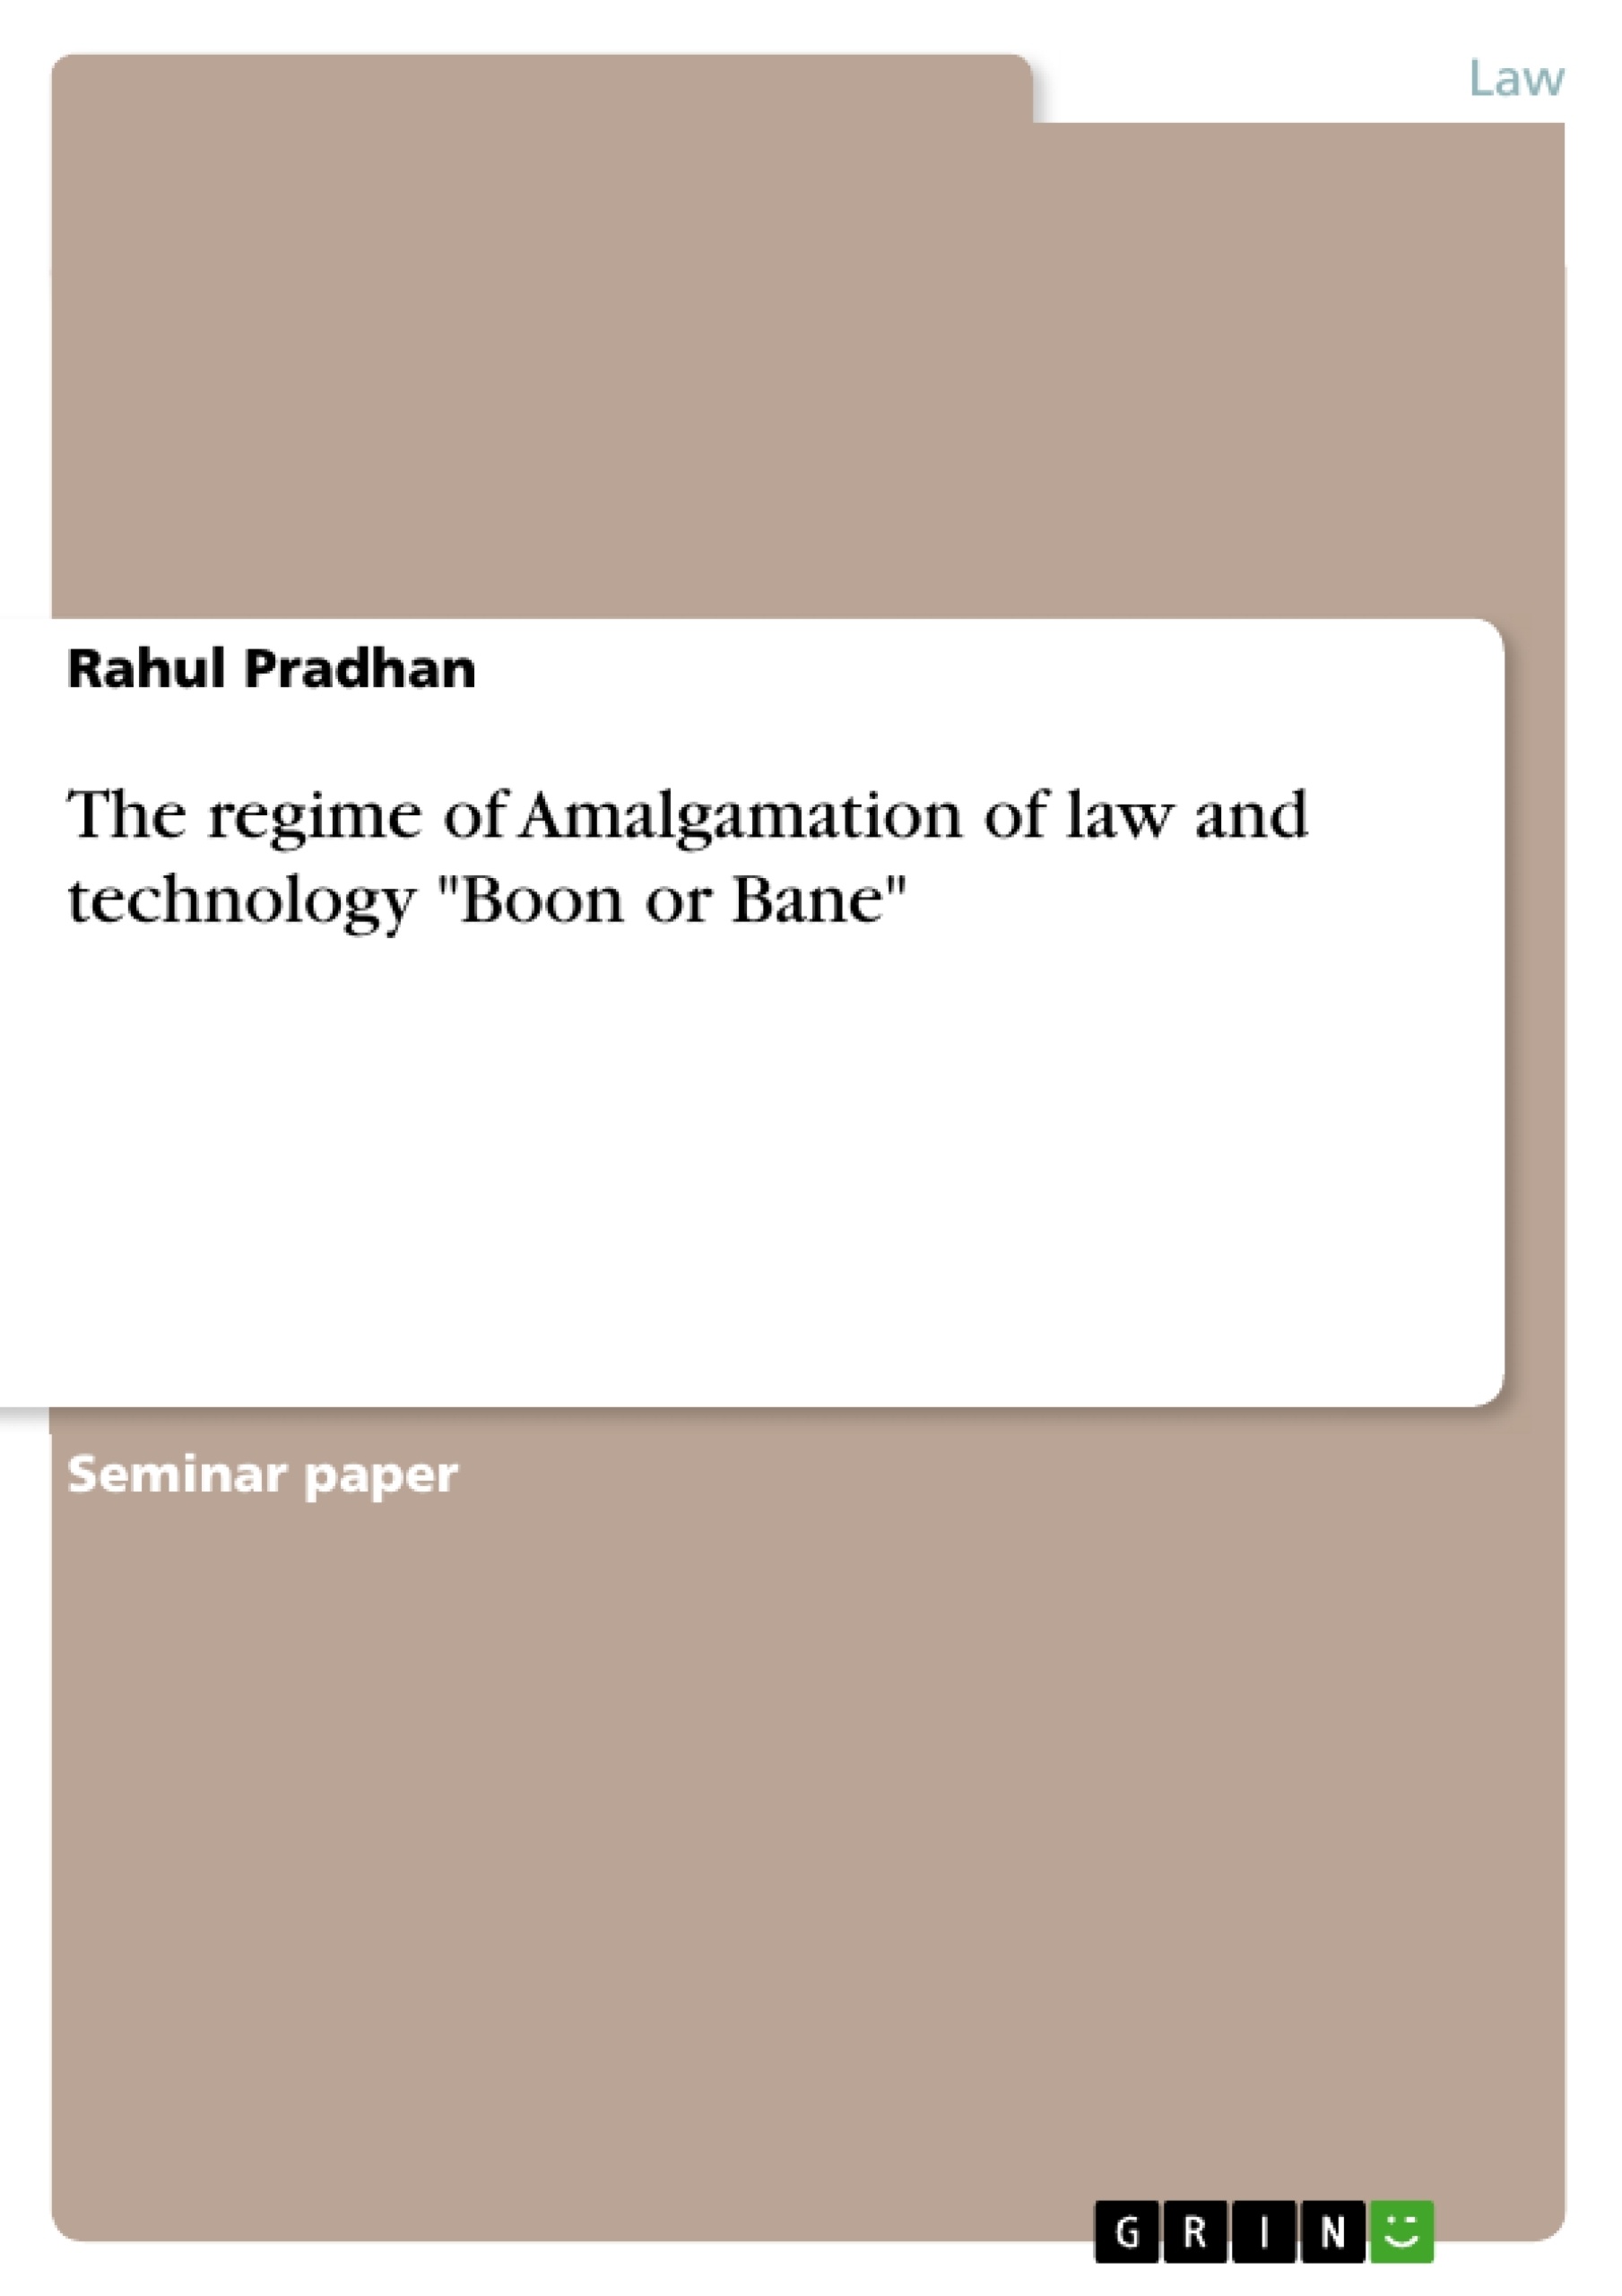 Titel: The regime of Amalgamation of law and technology "Boon or Bane"